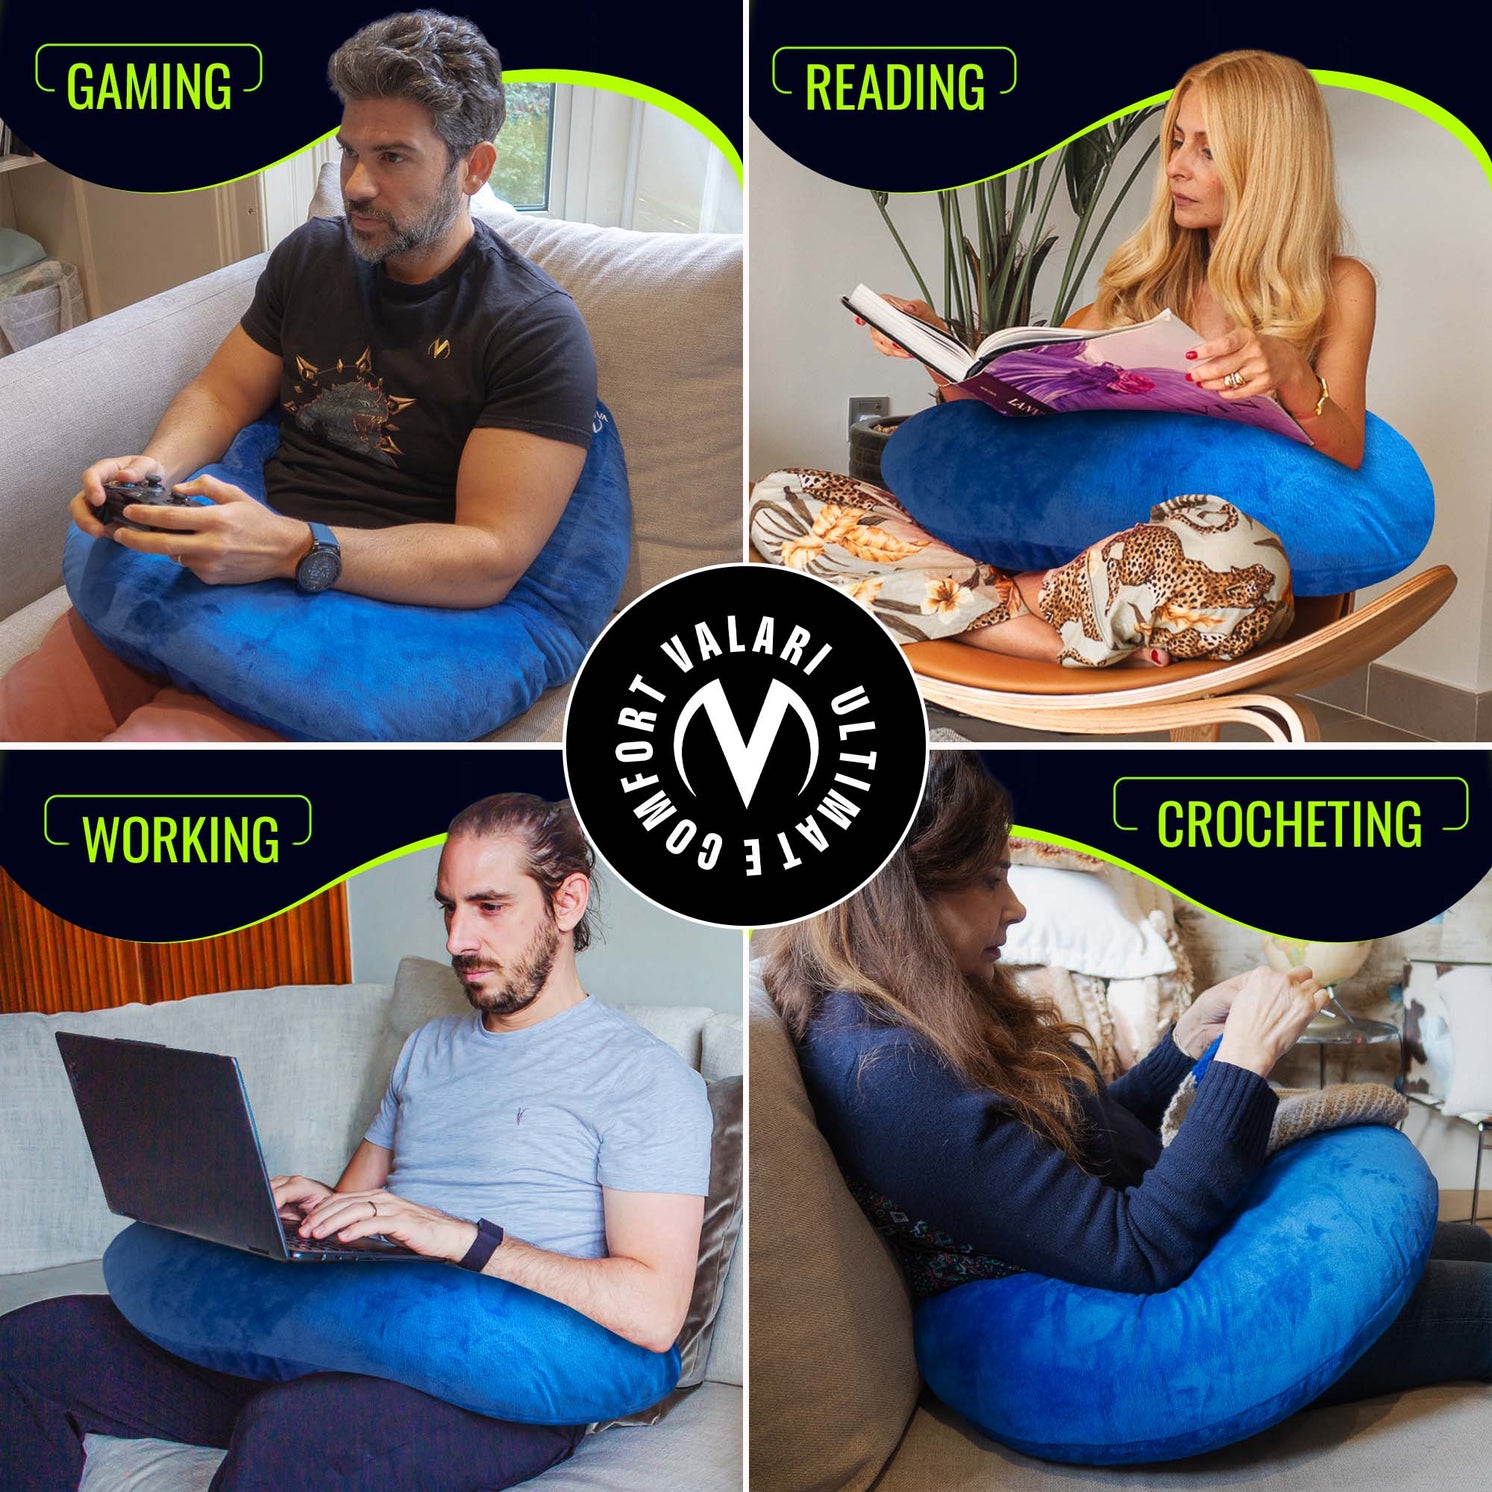 The Valari Pillow. Do your back a favour when Gaming 